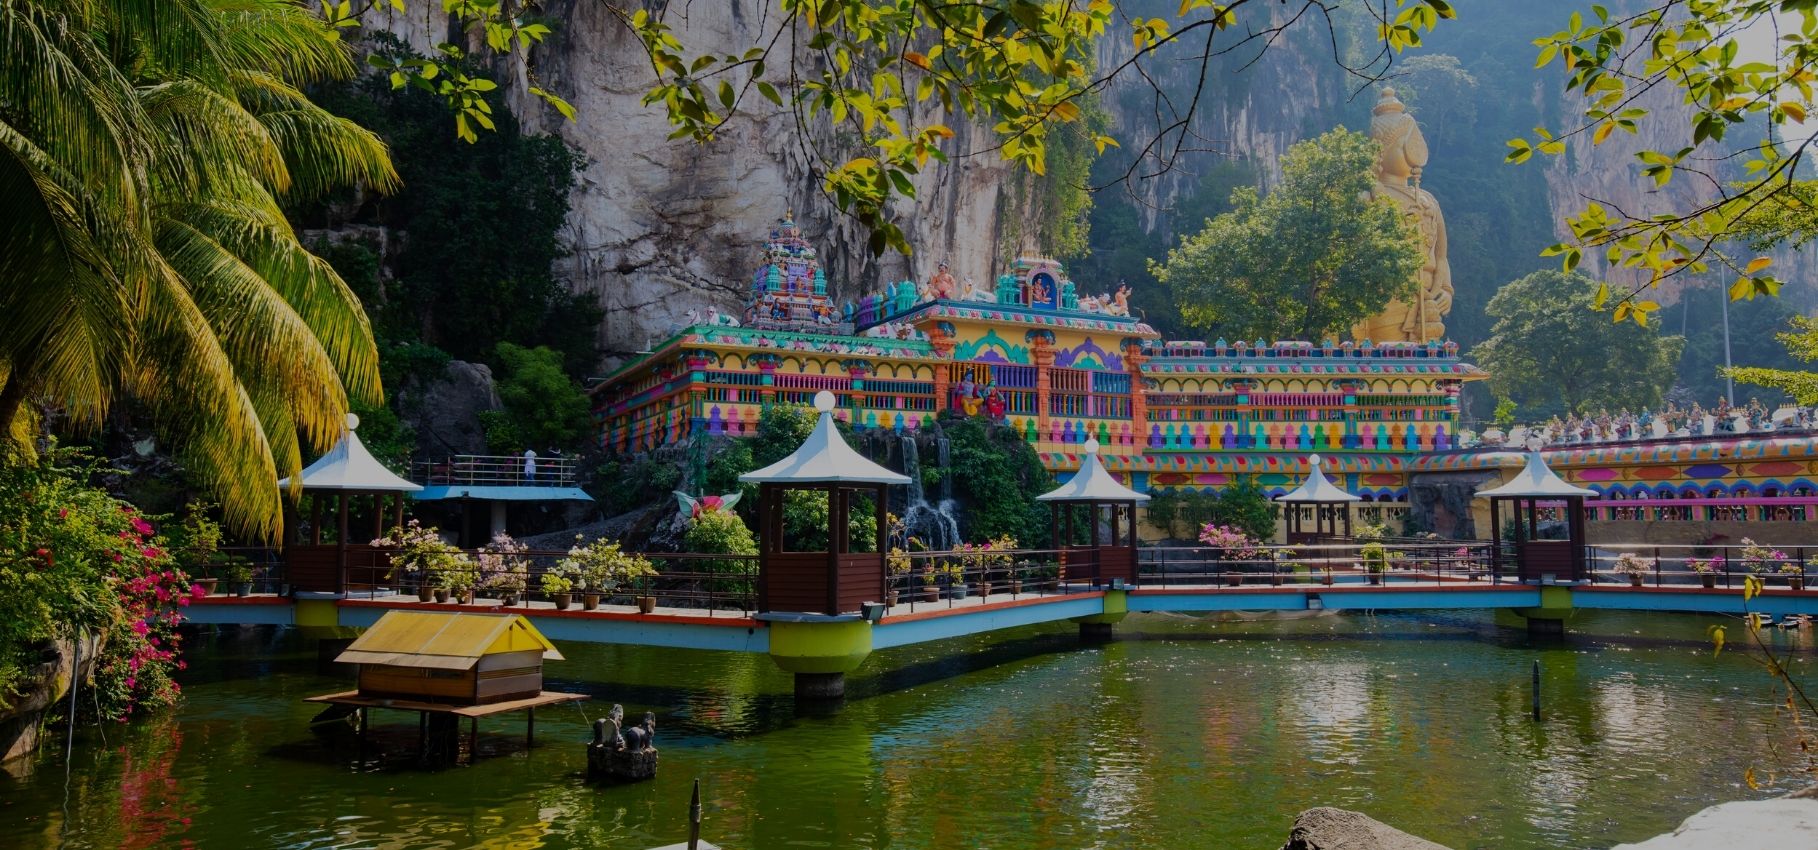 All you need to know about Batu Caves, Kuala Lumpur